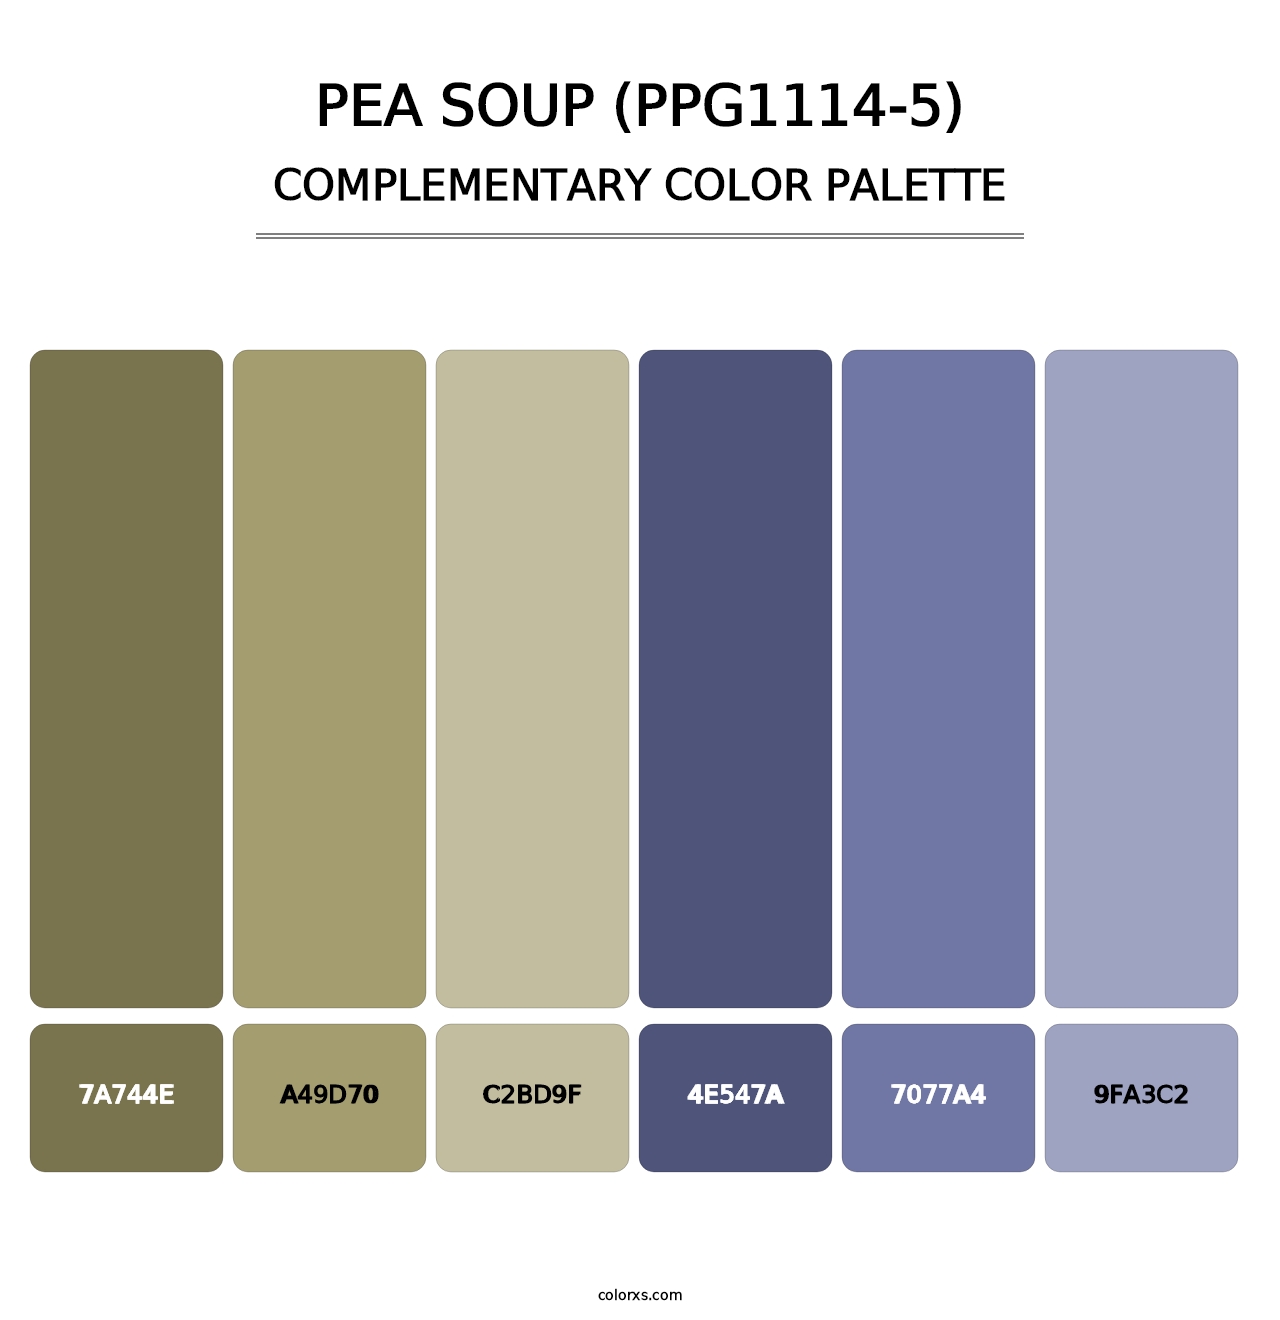 Pea Soup (PPG1114-5) - Complementary Color Palette